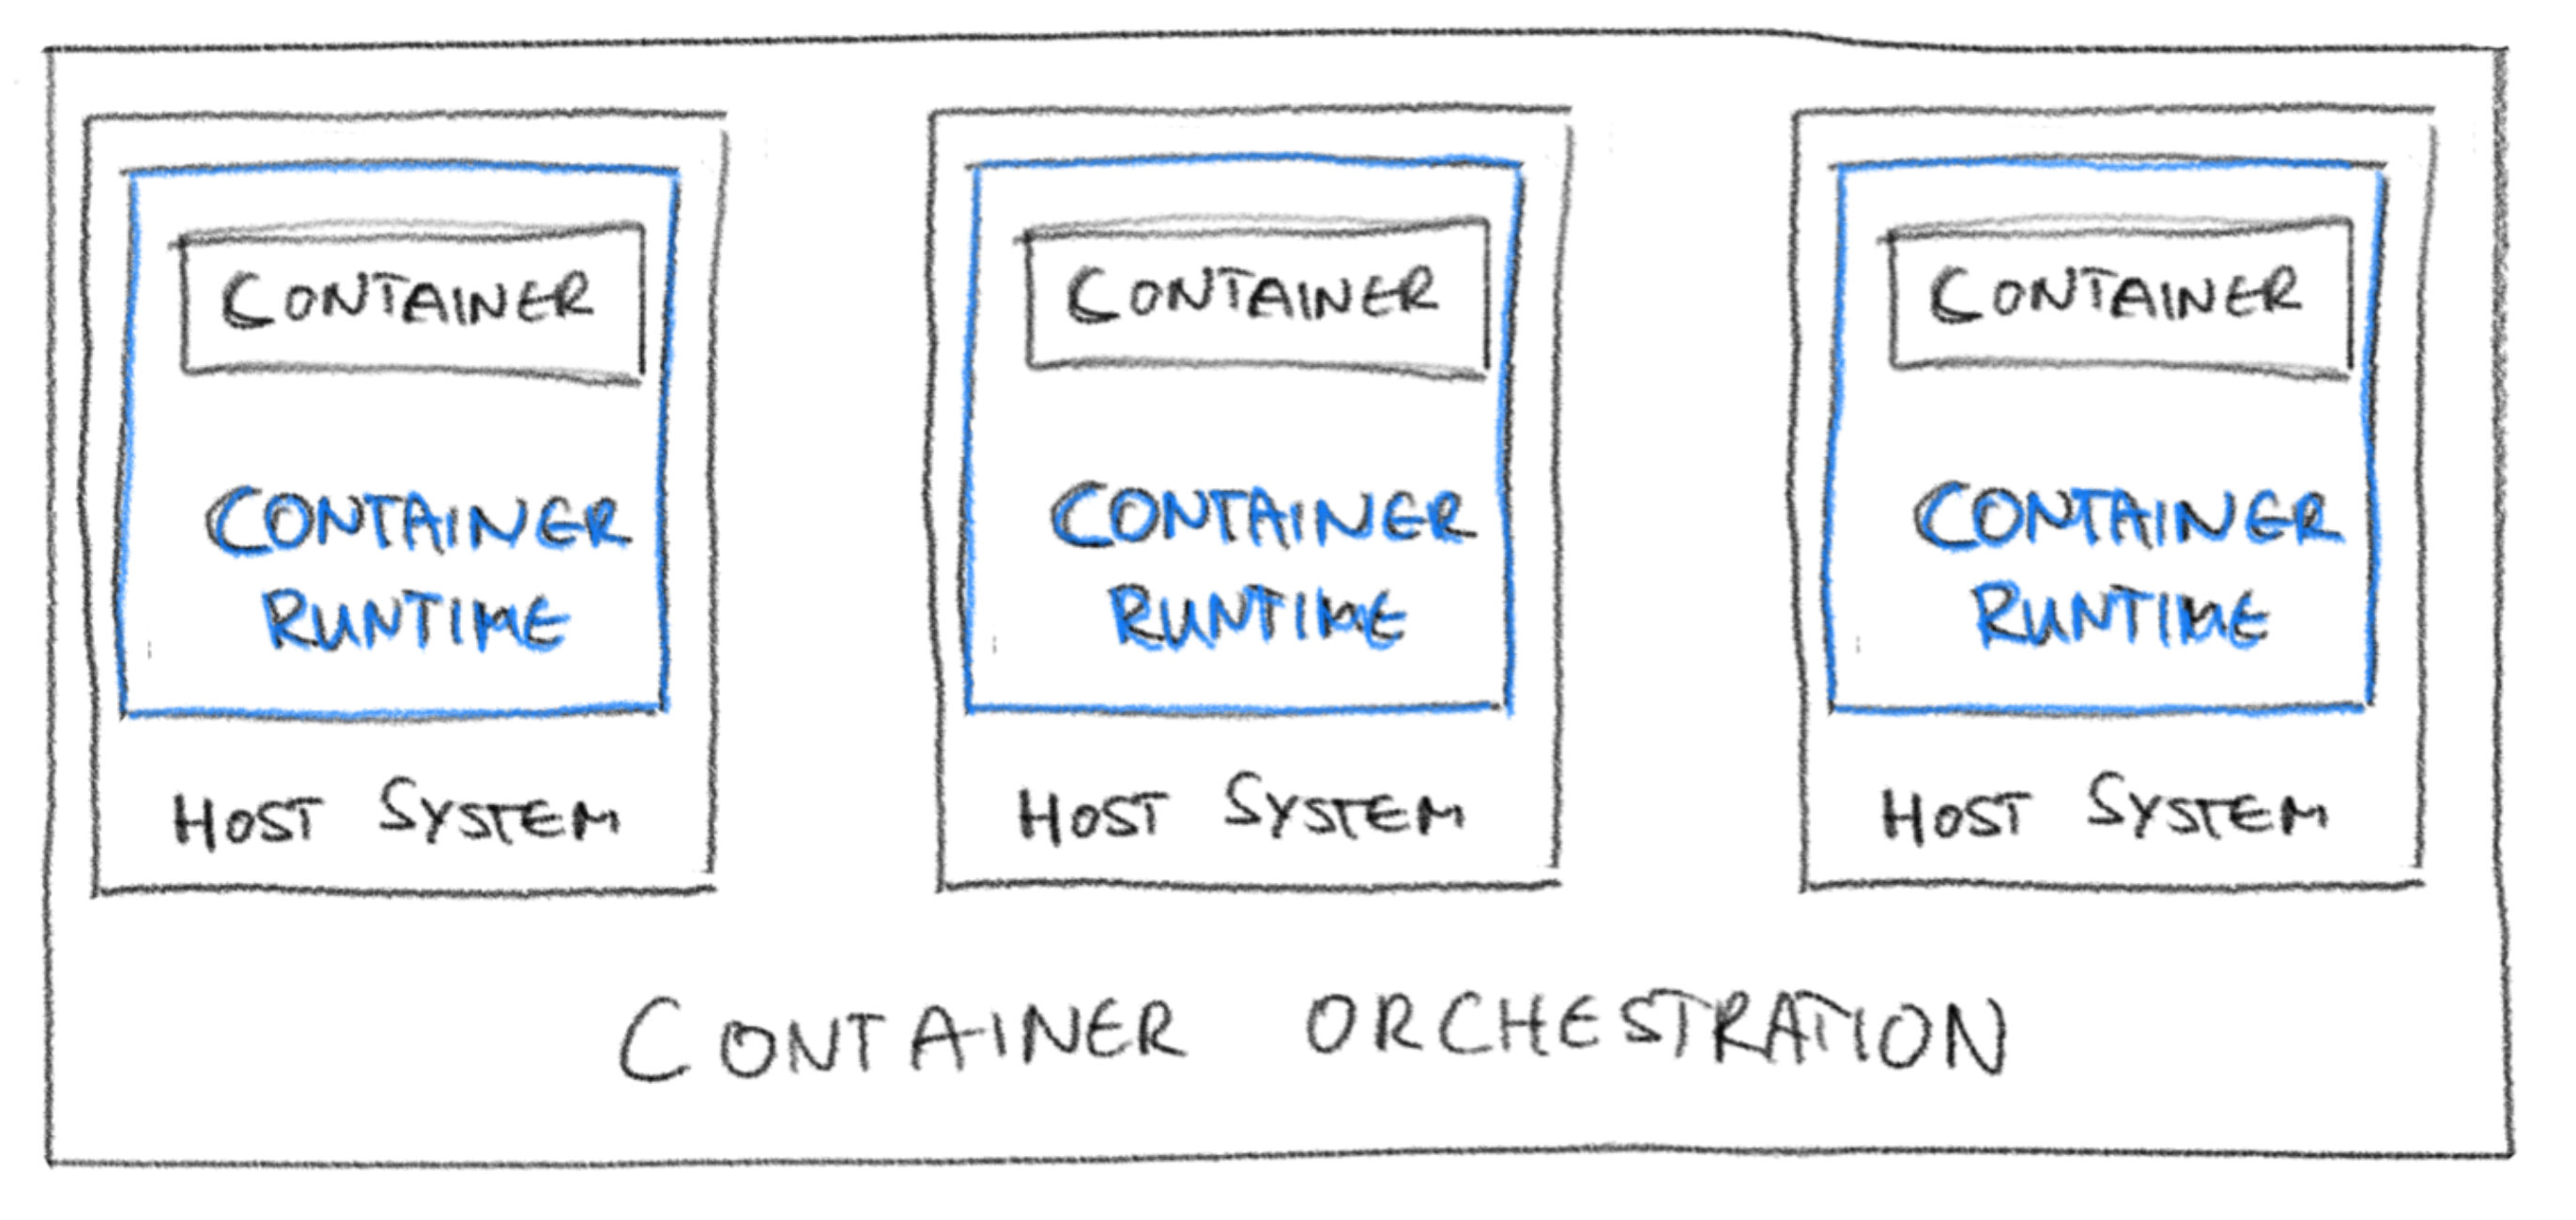 Container Runtime.png